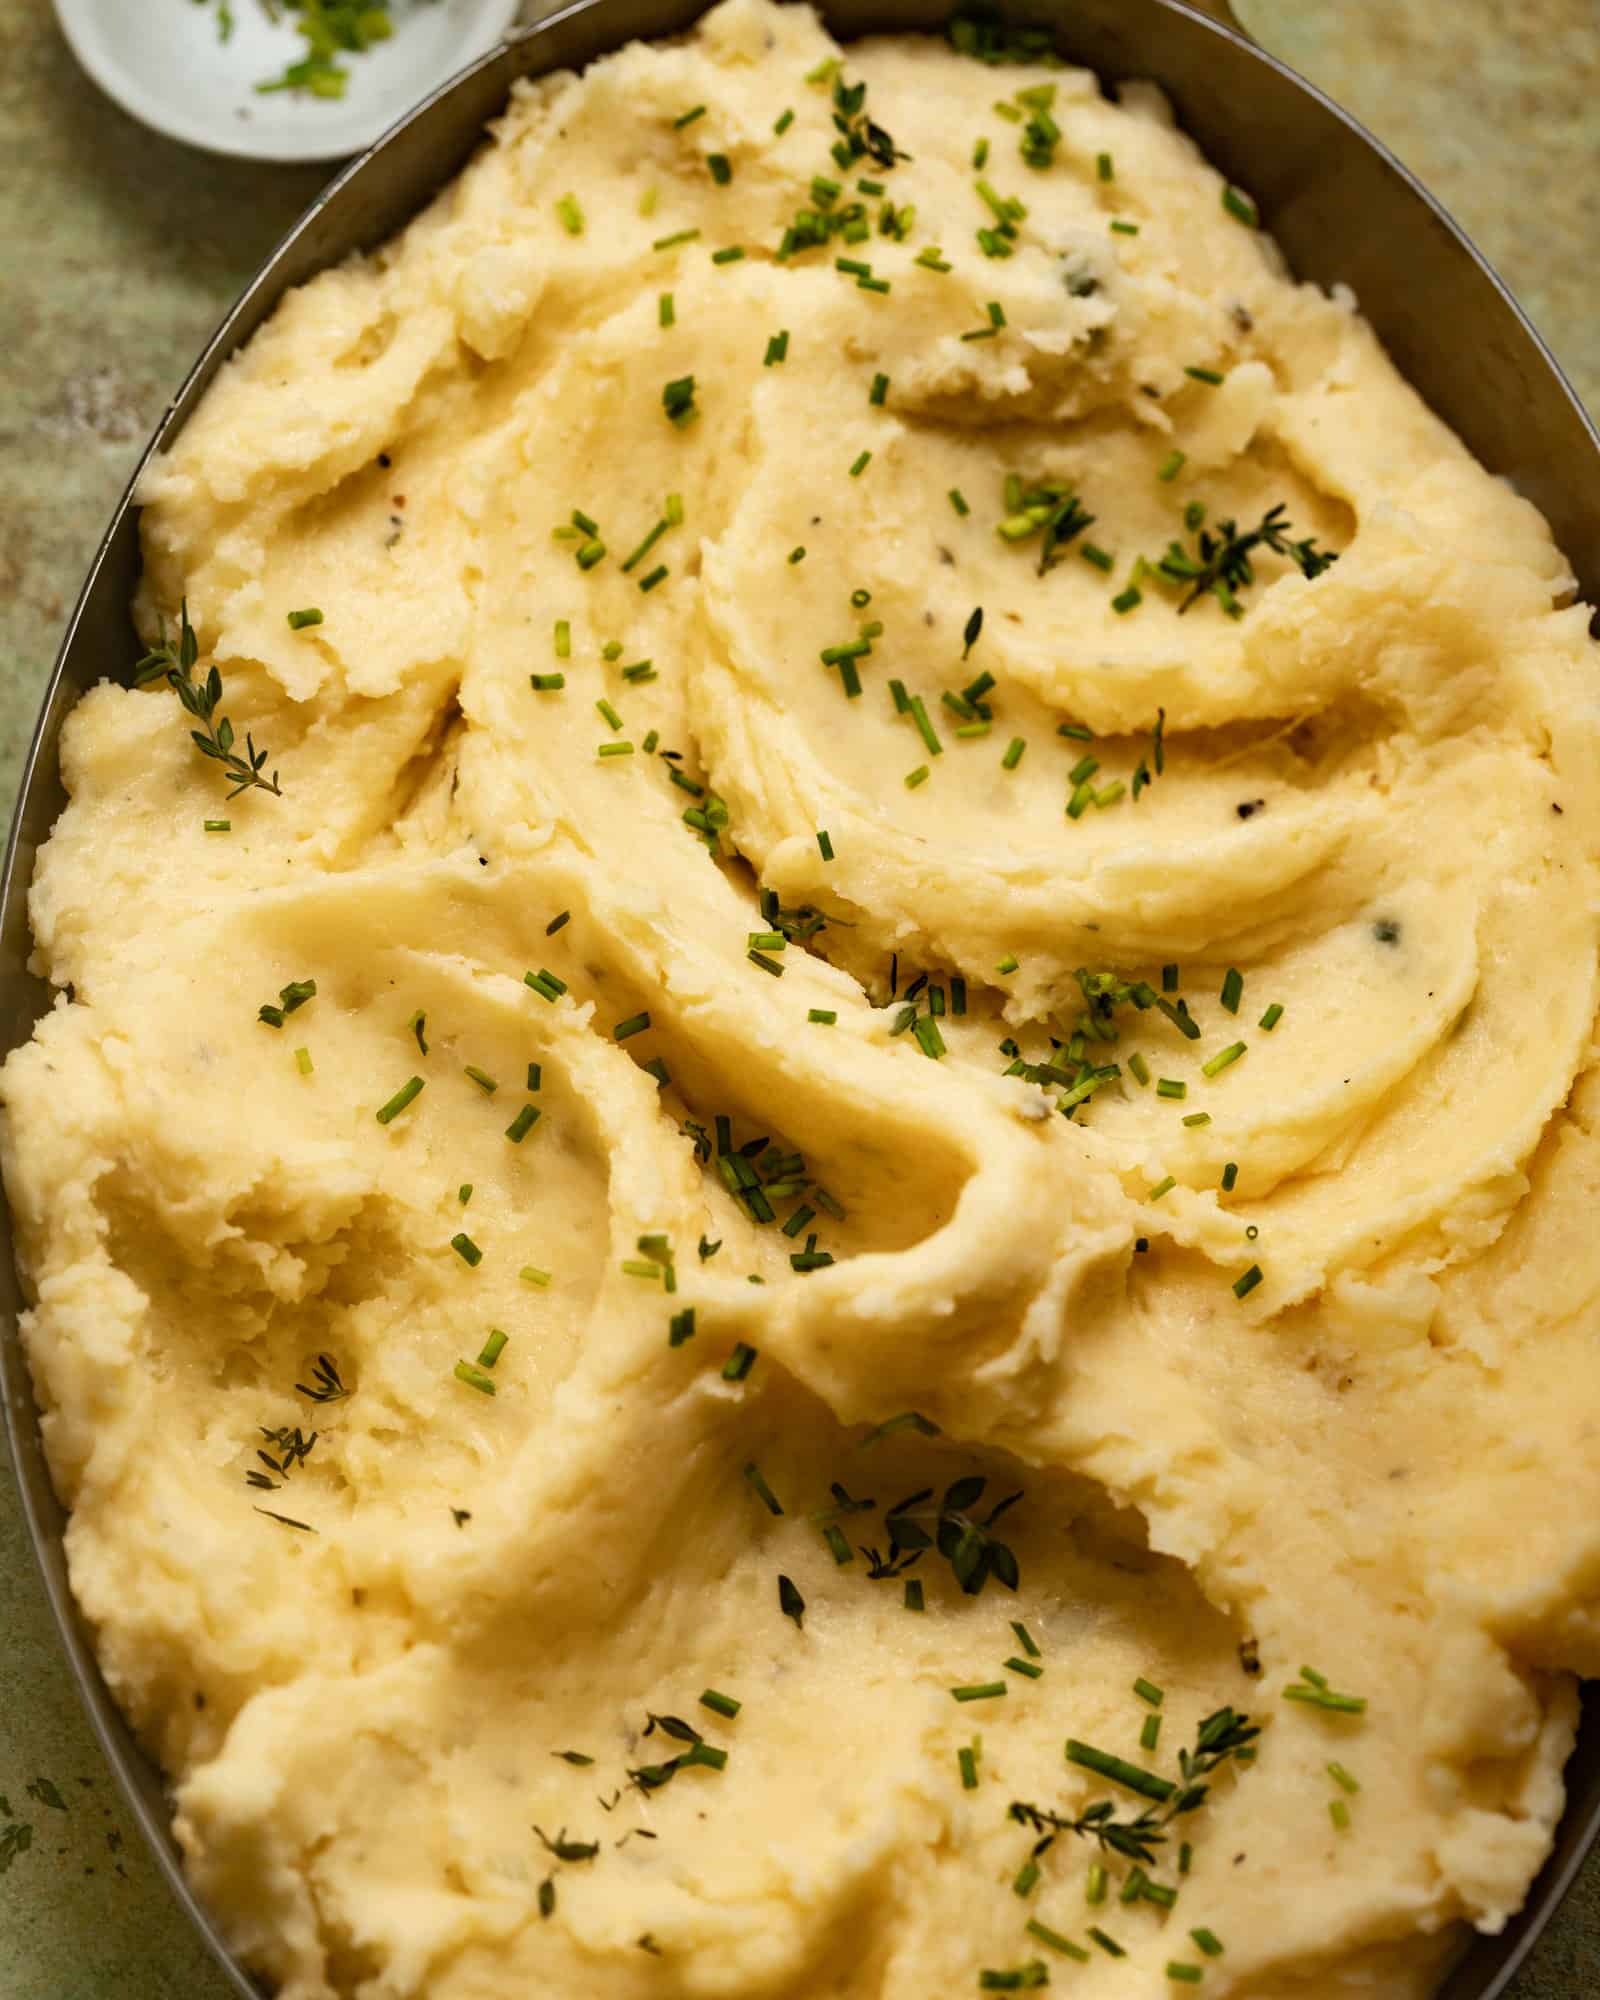 Cheesy mashed potatoes in a baking dish topped with fresh chives.